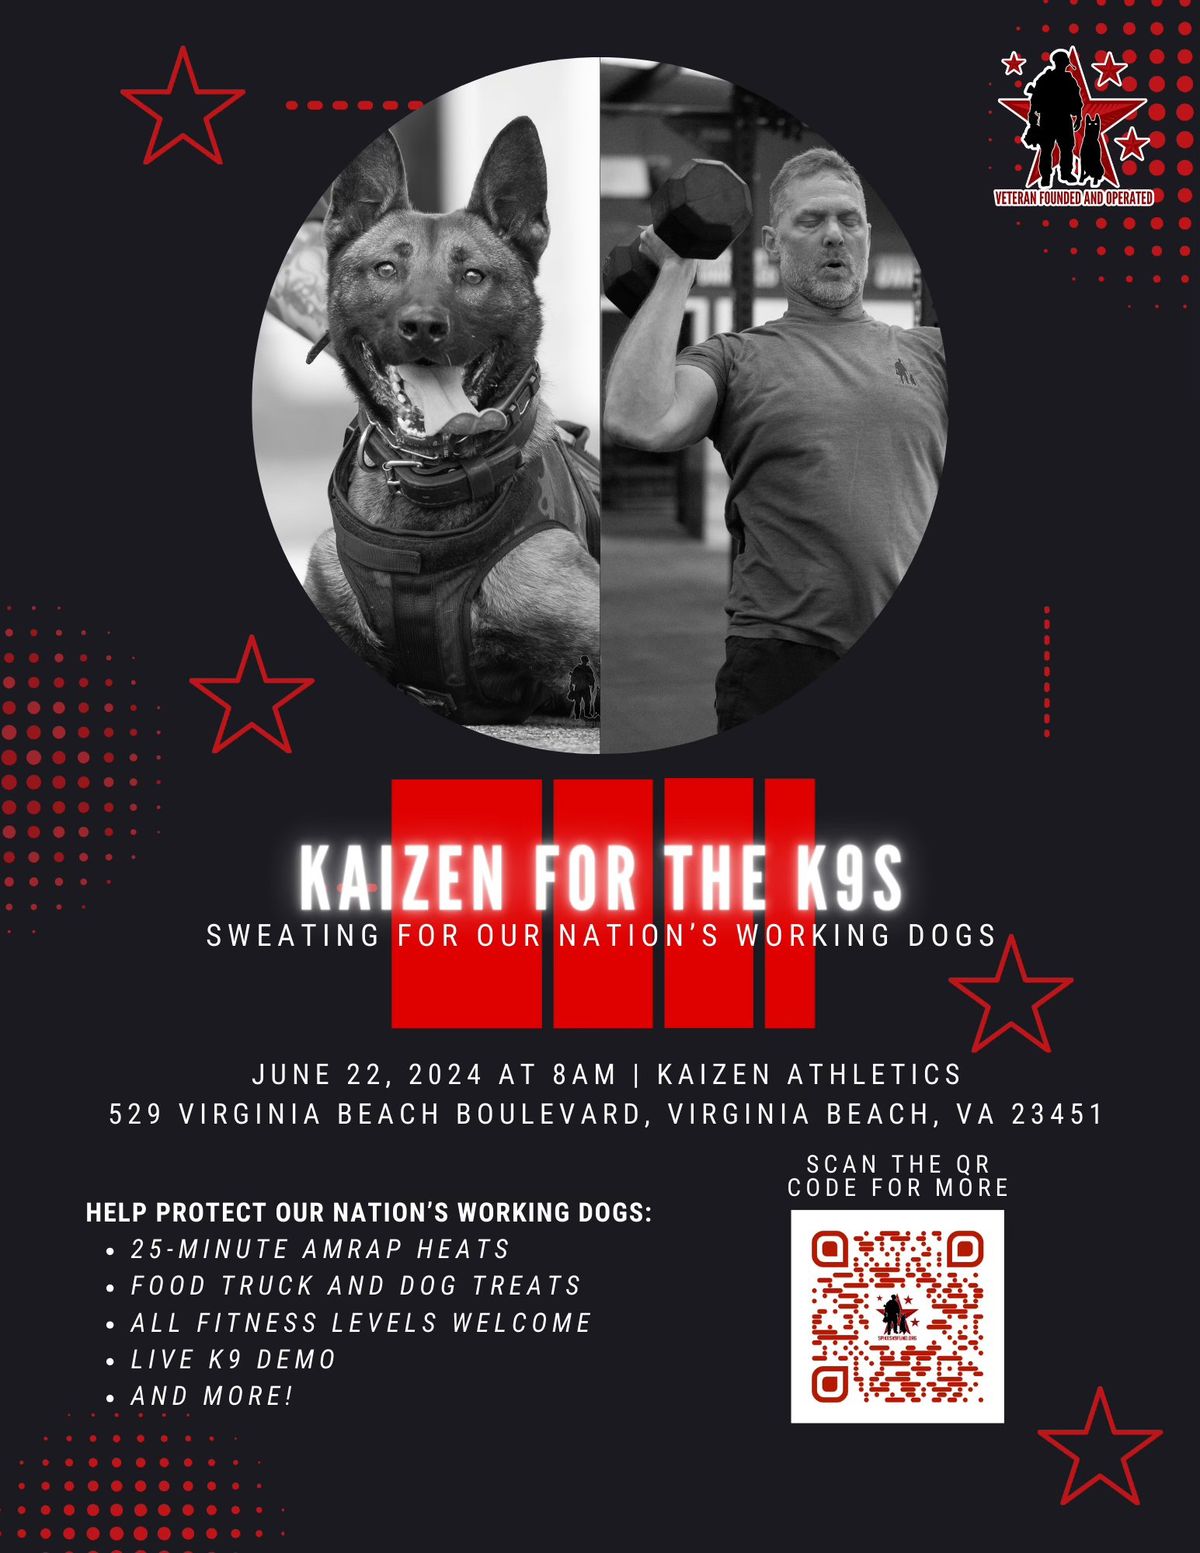 Kaizen for the K9s